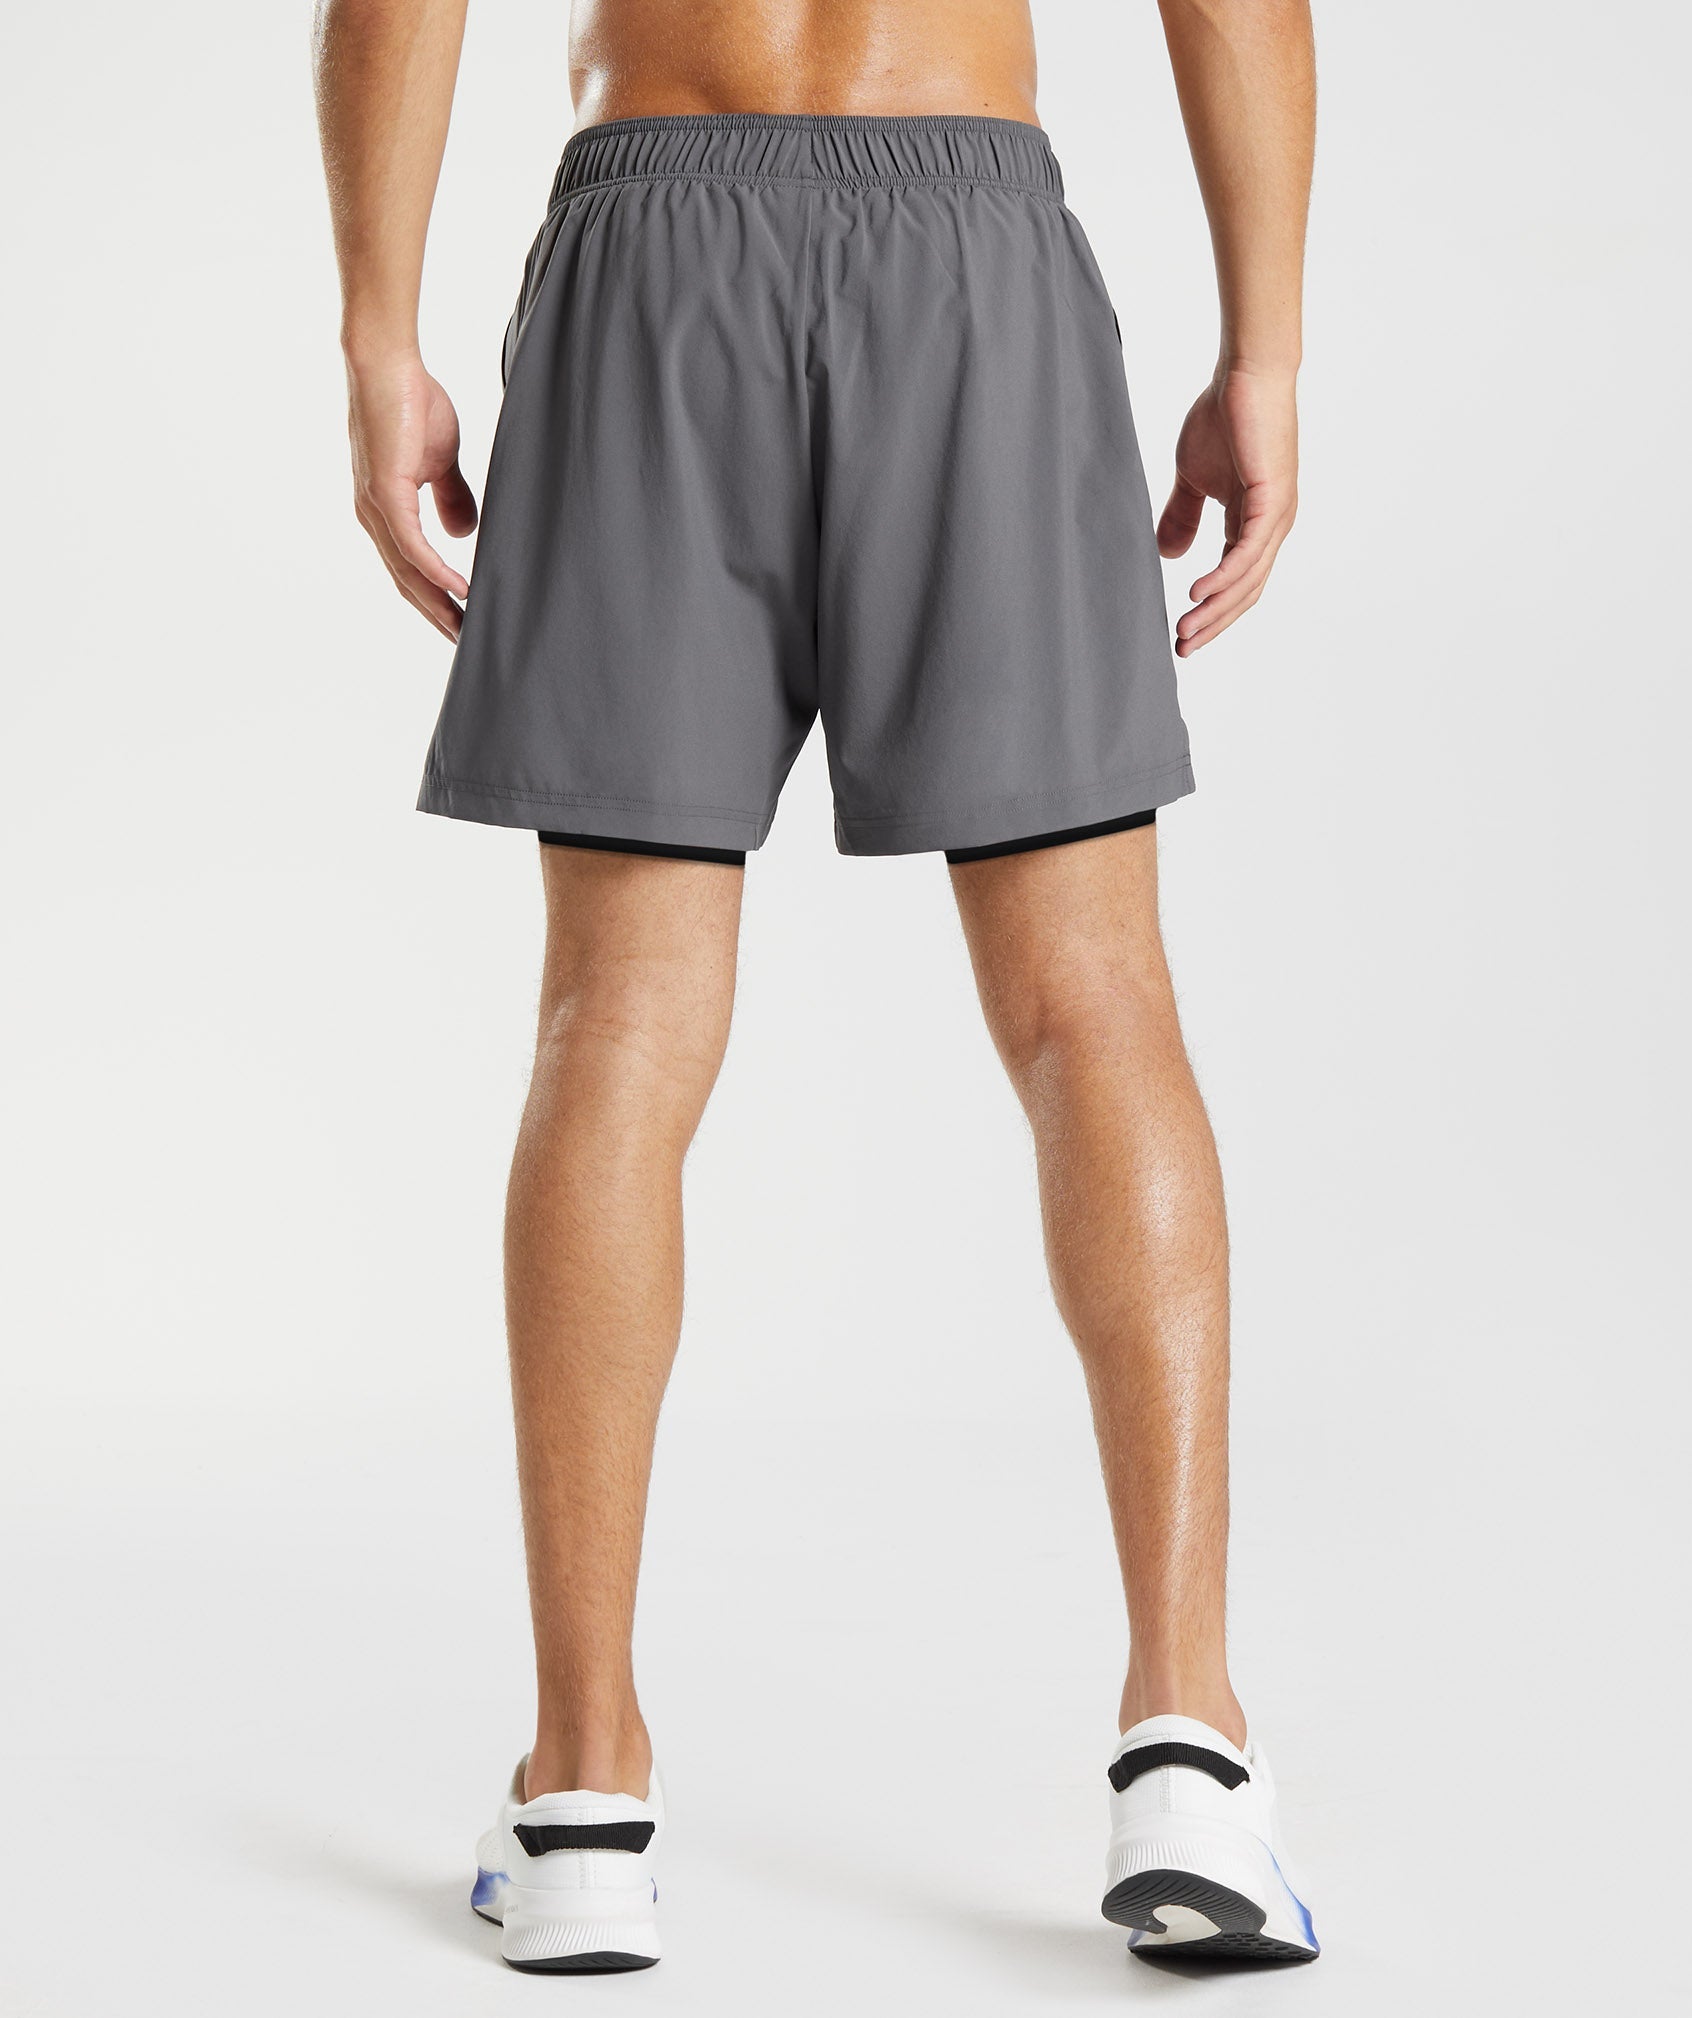 Sport 7" 2 In 1 Shorts in Silhouette Grey/Black - view 2